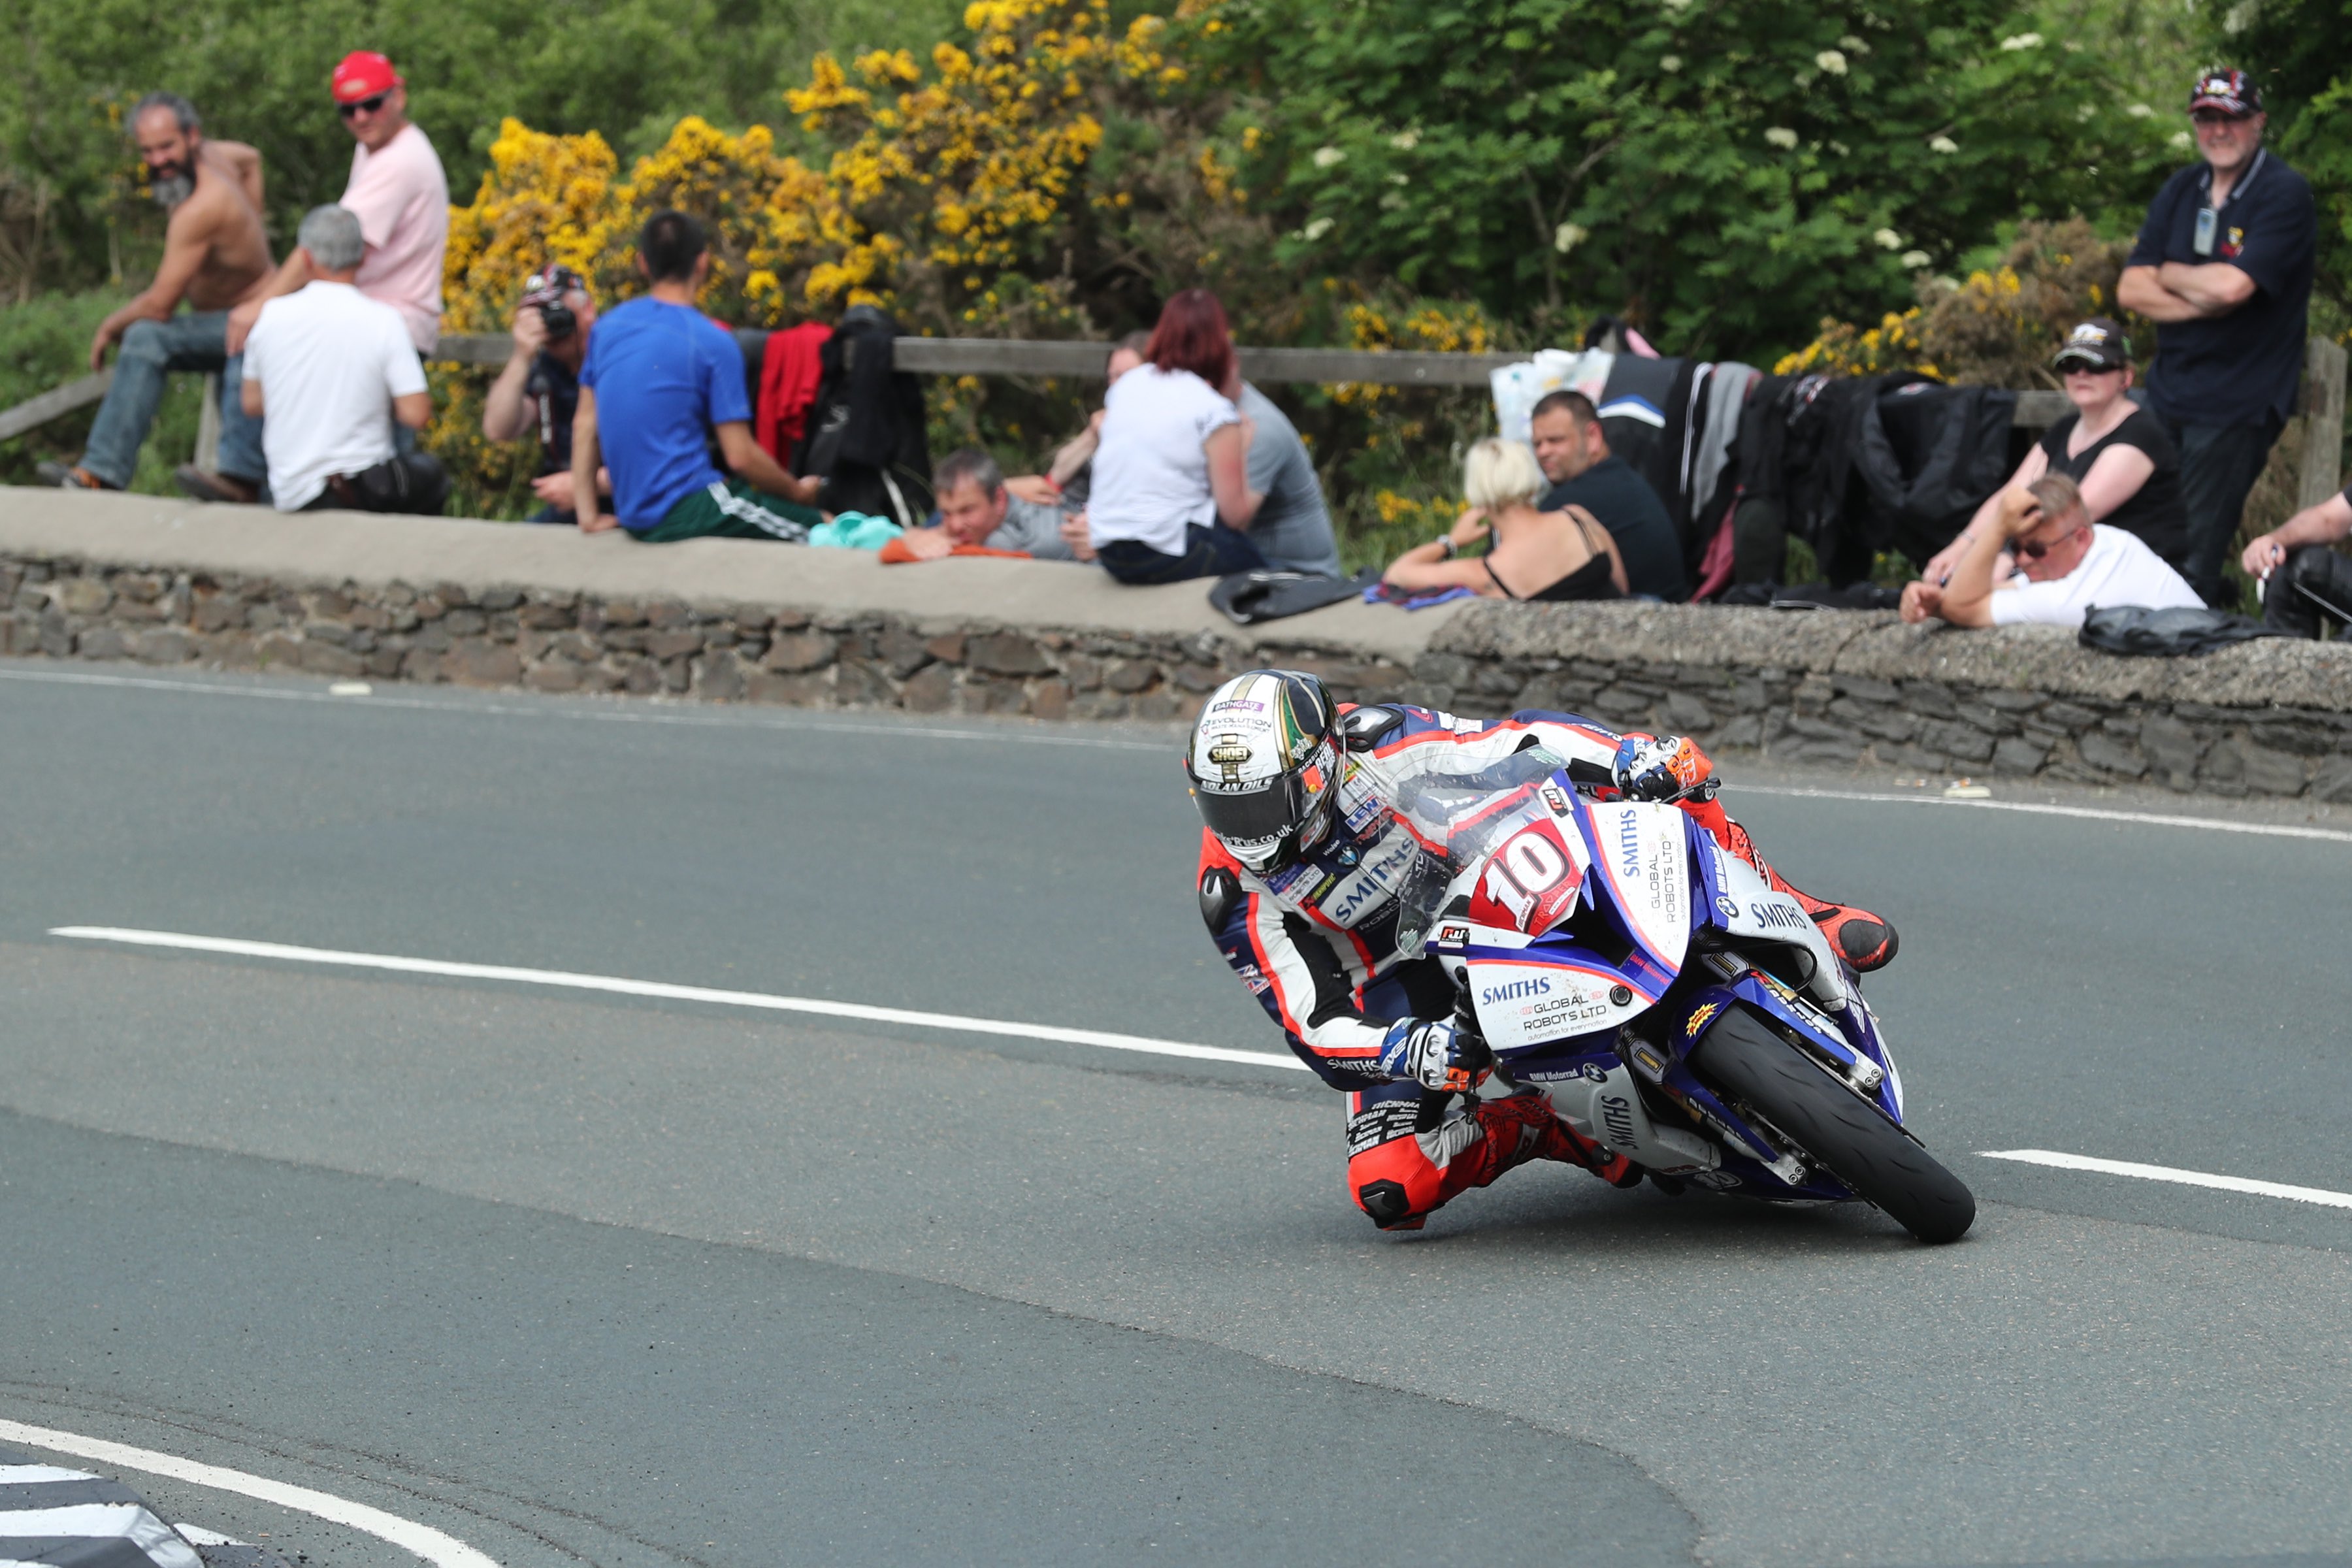 Lap Record and maiden win for Peter Hickman at IOMTT | FUCHS LUBRICANTS ...